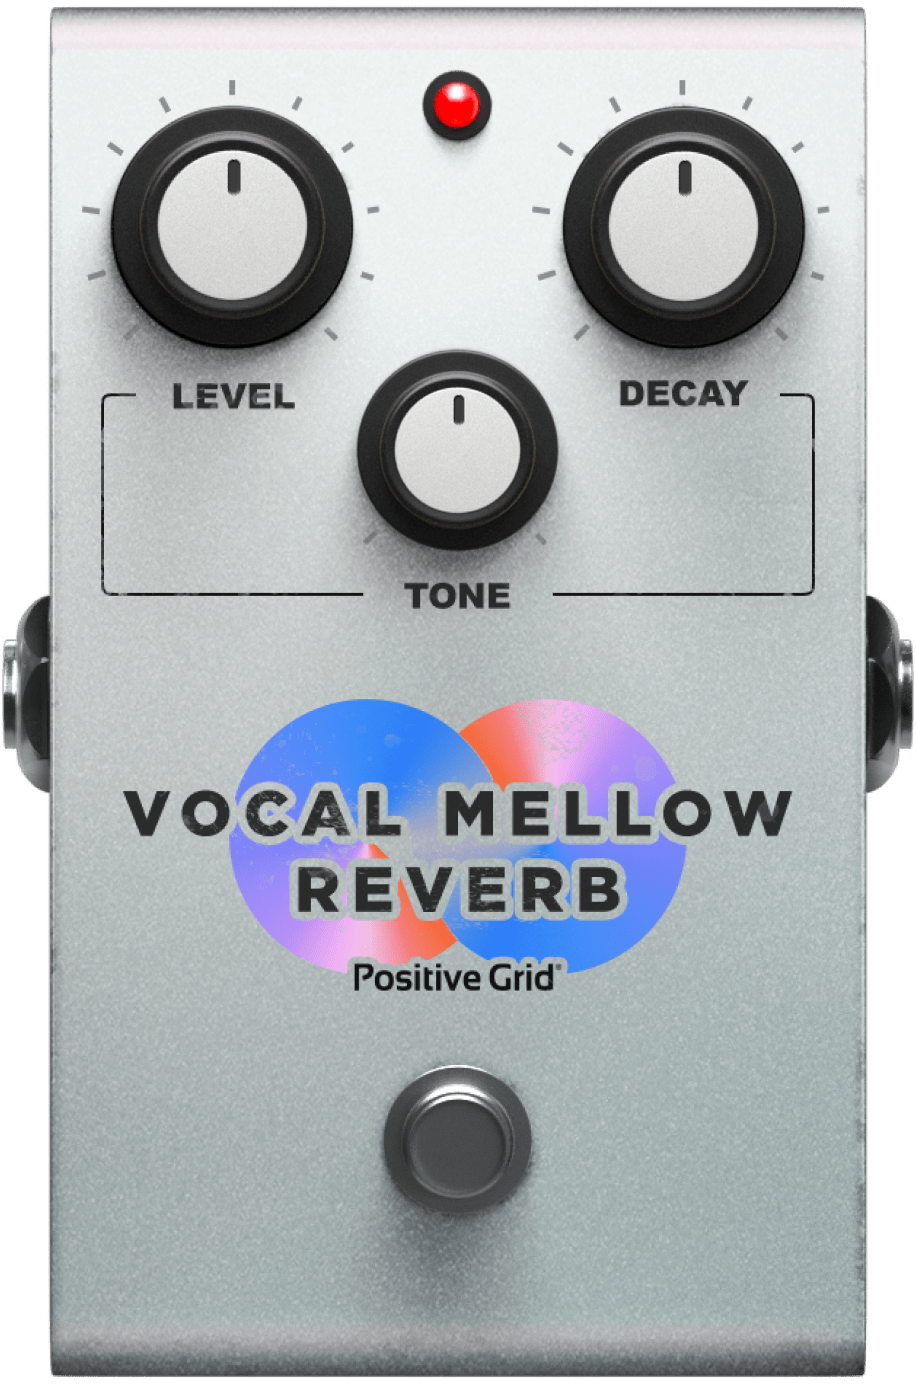 Vocal Mellow Reverb, inspired by NC